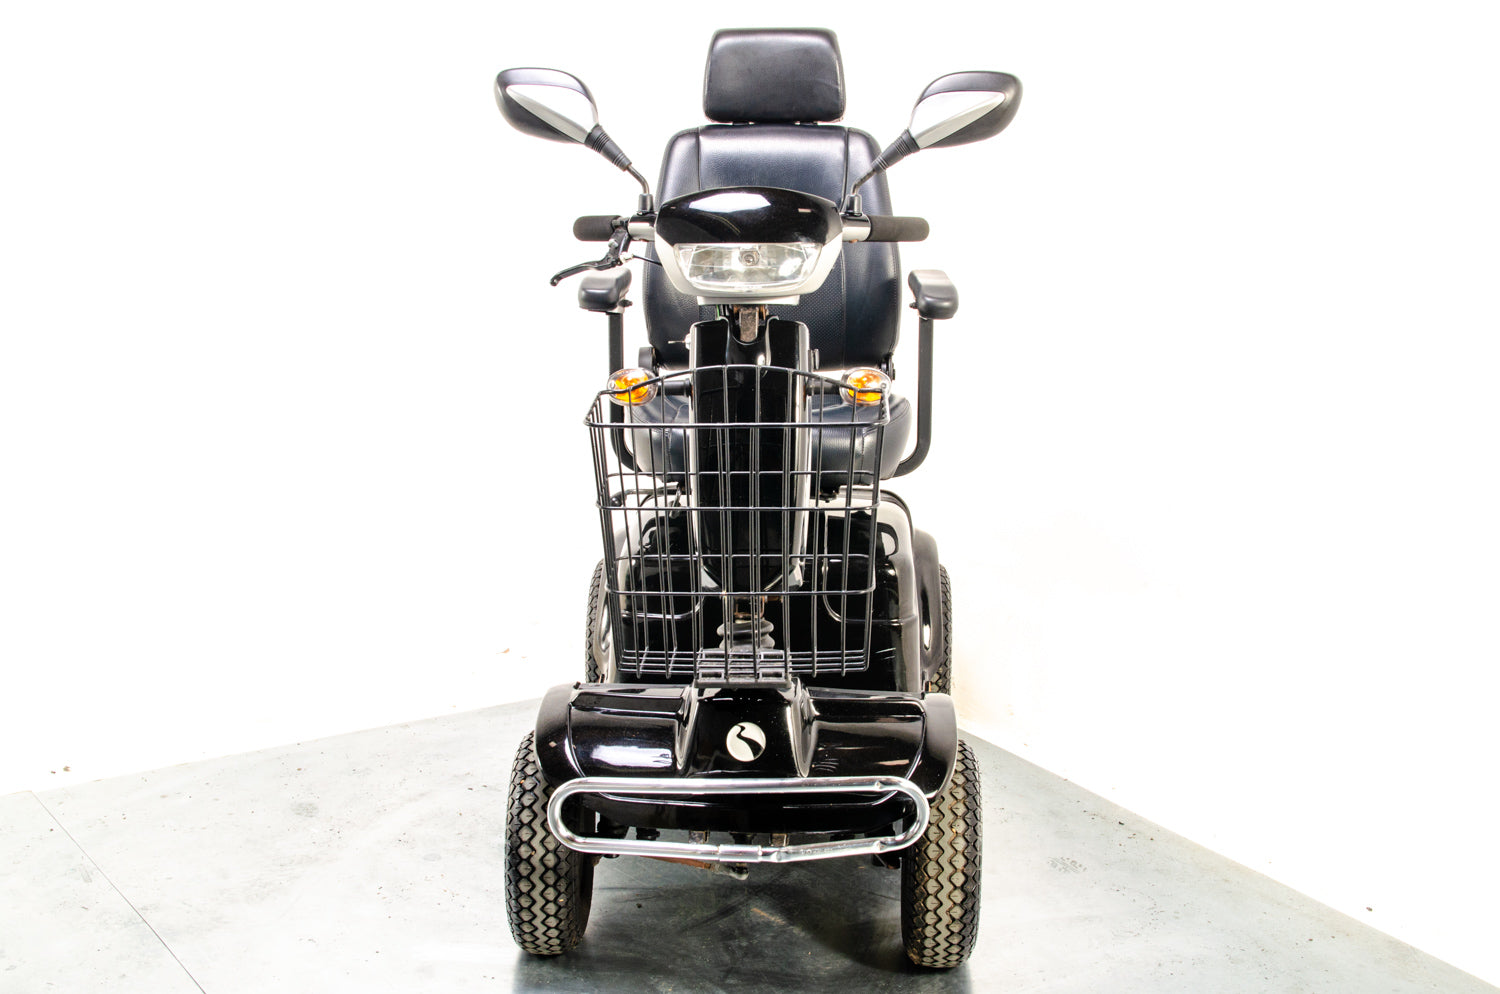 Rascal Pioneer Used Electric Mobility Scooter 8mph All-Terrain Suspension Off-Road Black 03547